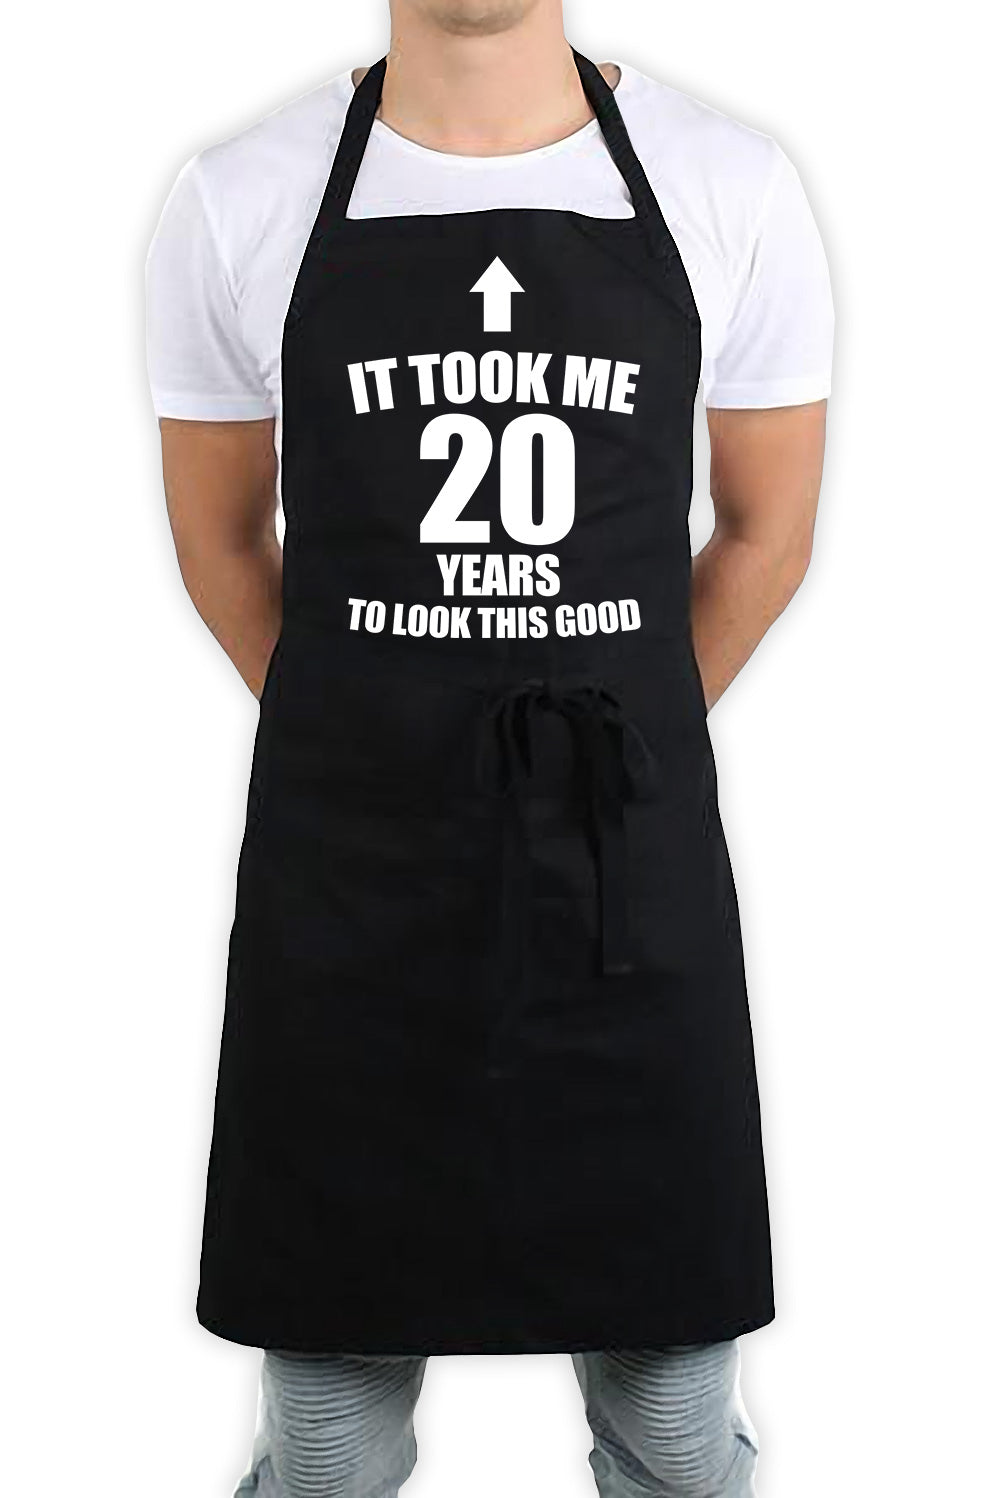 It Took Me 20 Years To Look This Good Funny Kitchen BBQ Apron Black